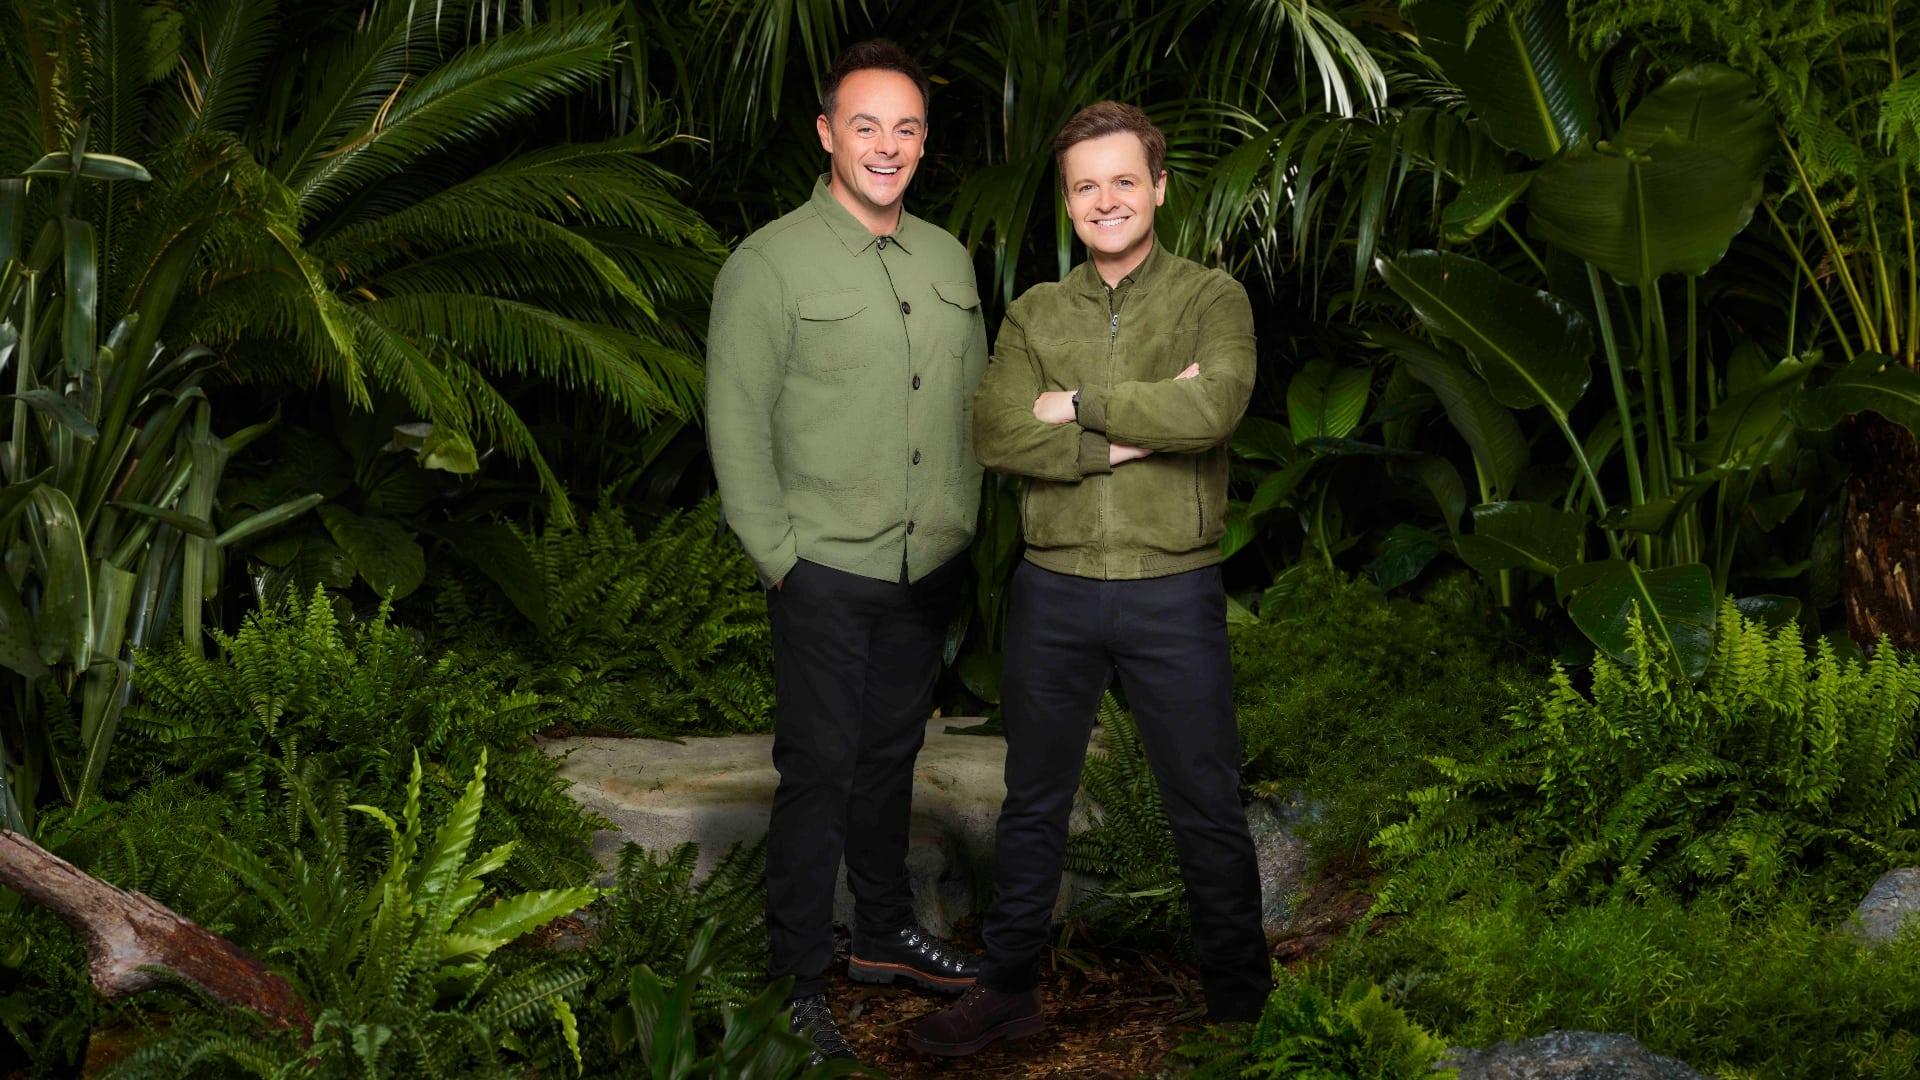 I'm a Celebrity...Get Me Out of Here! backdrop